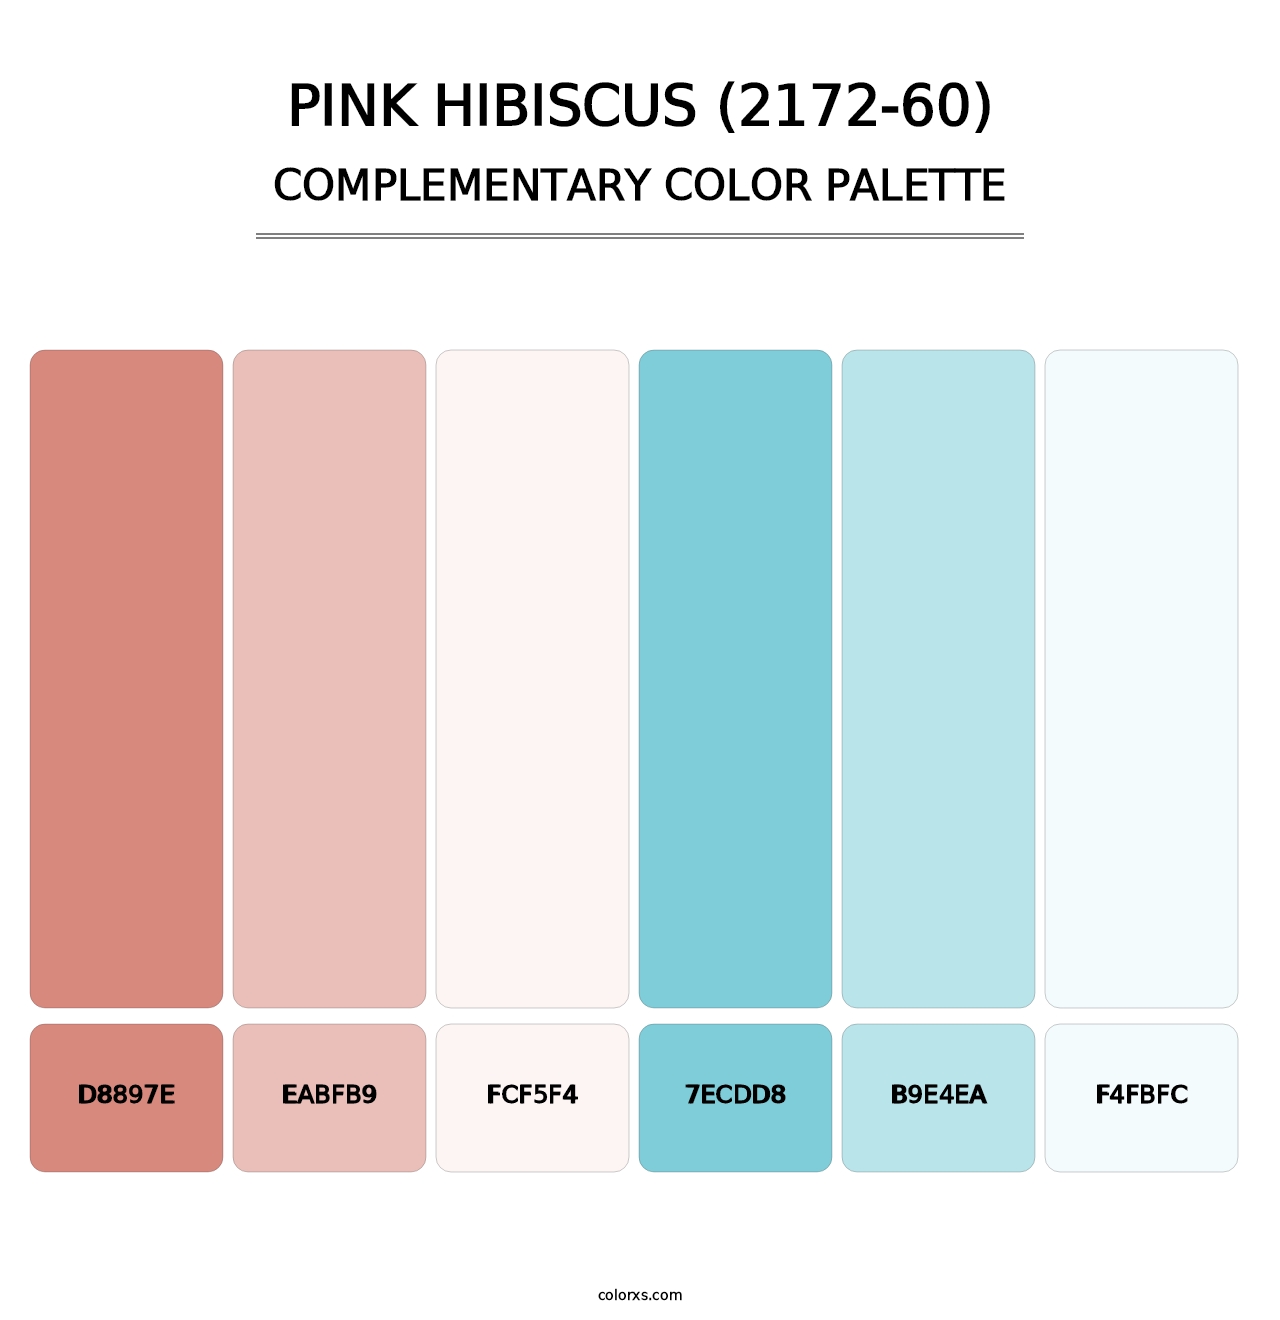 Pink Hibiscus (2172-60) - Complementary Color Palette